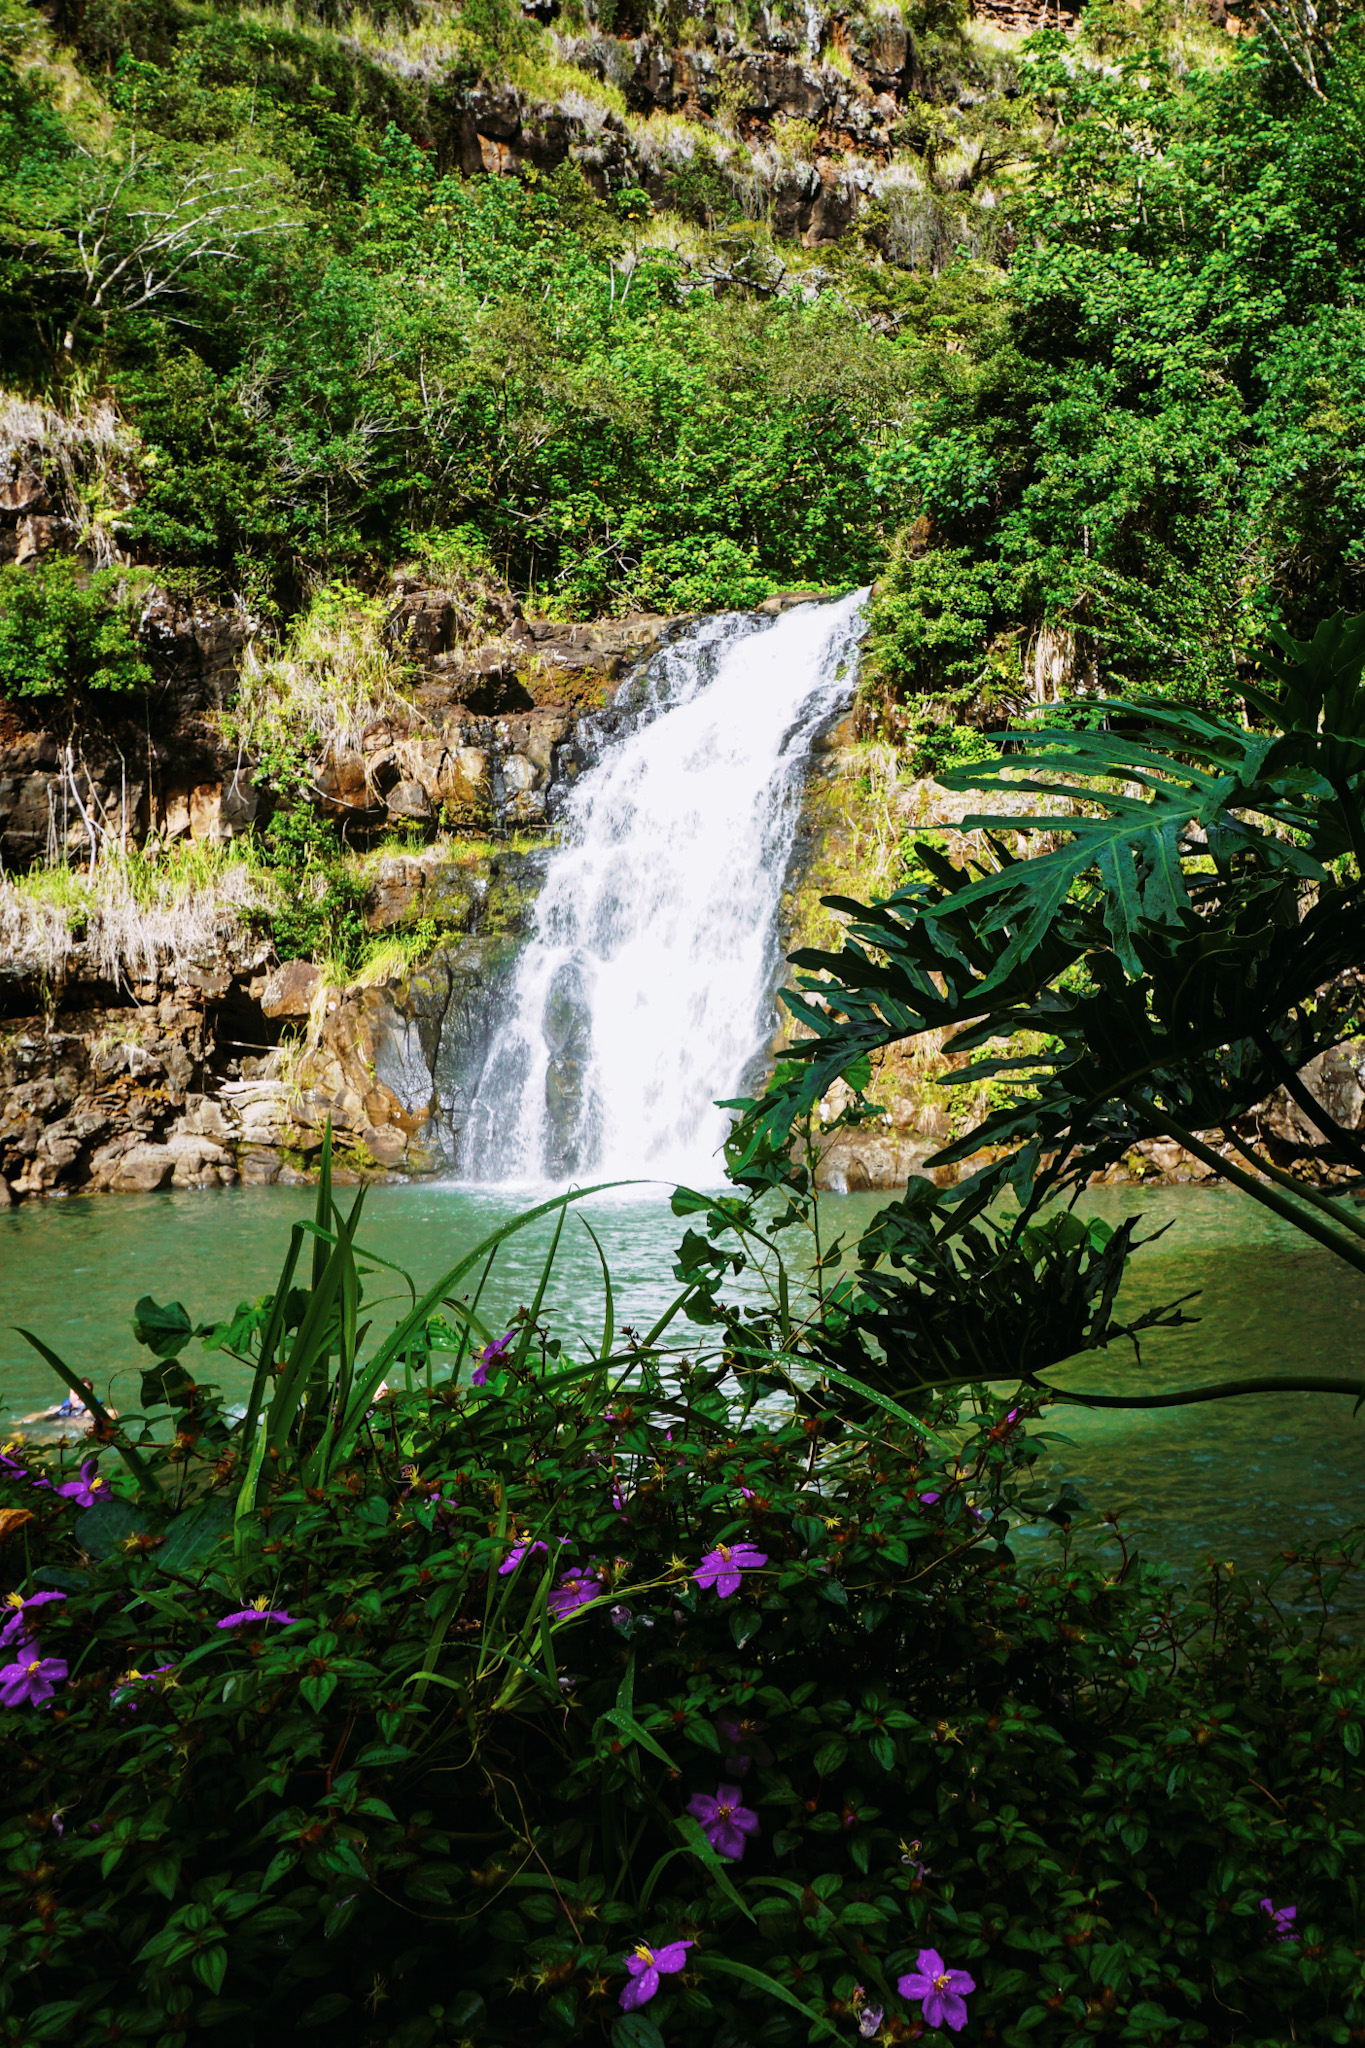 Waterfall surrounded by lush, green tropical foliage